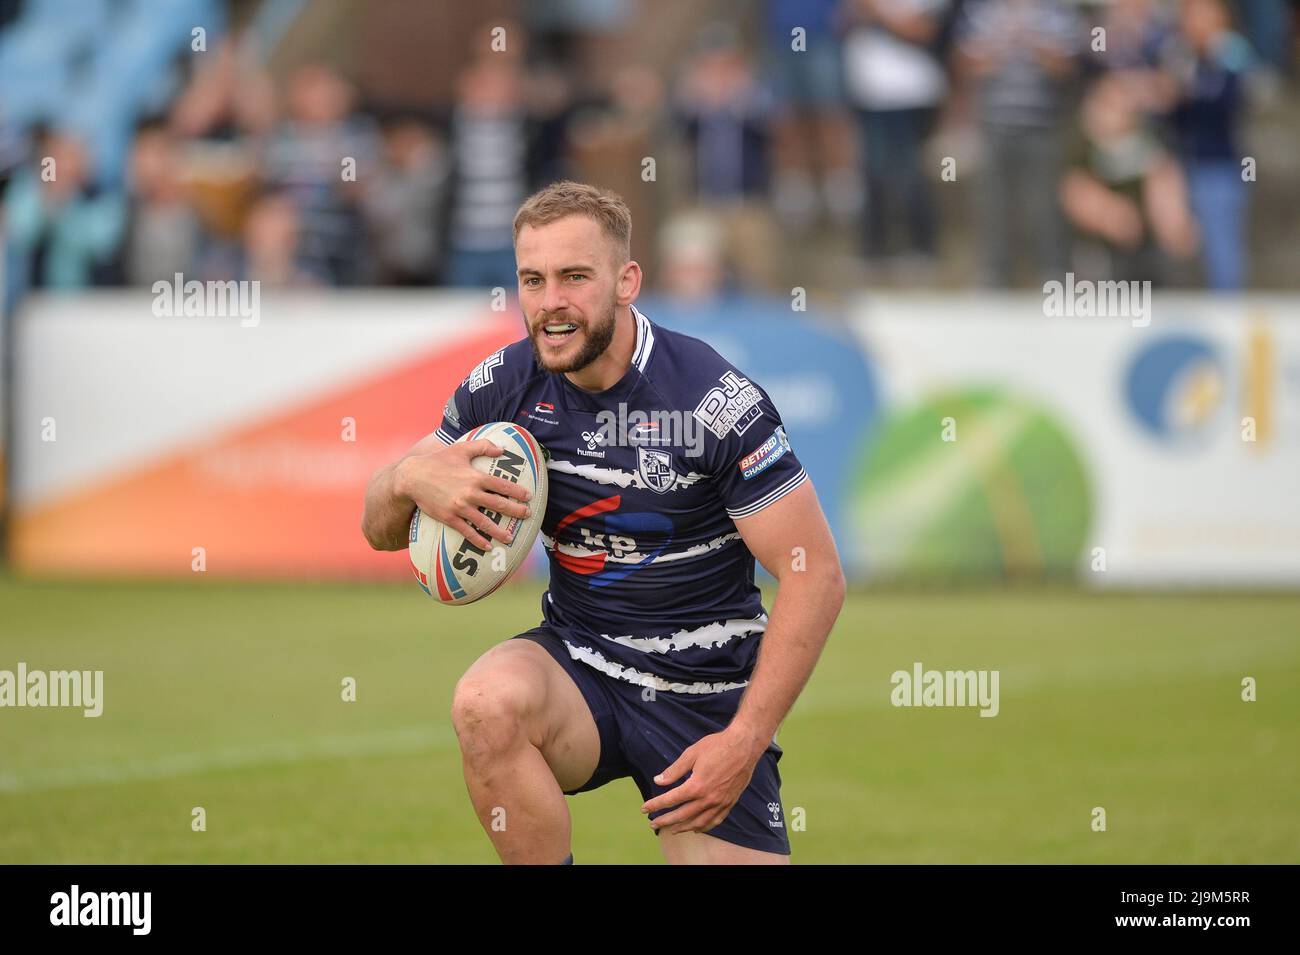 Featherstone, England - 21st May 2022 - Connor Jones of Featherstone Rovers scores a try